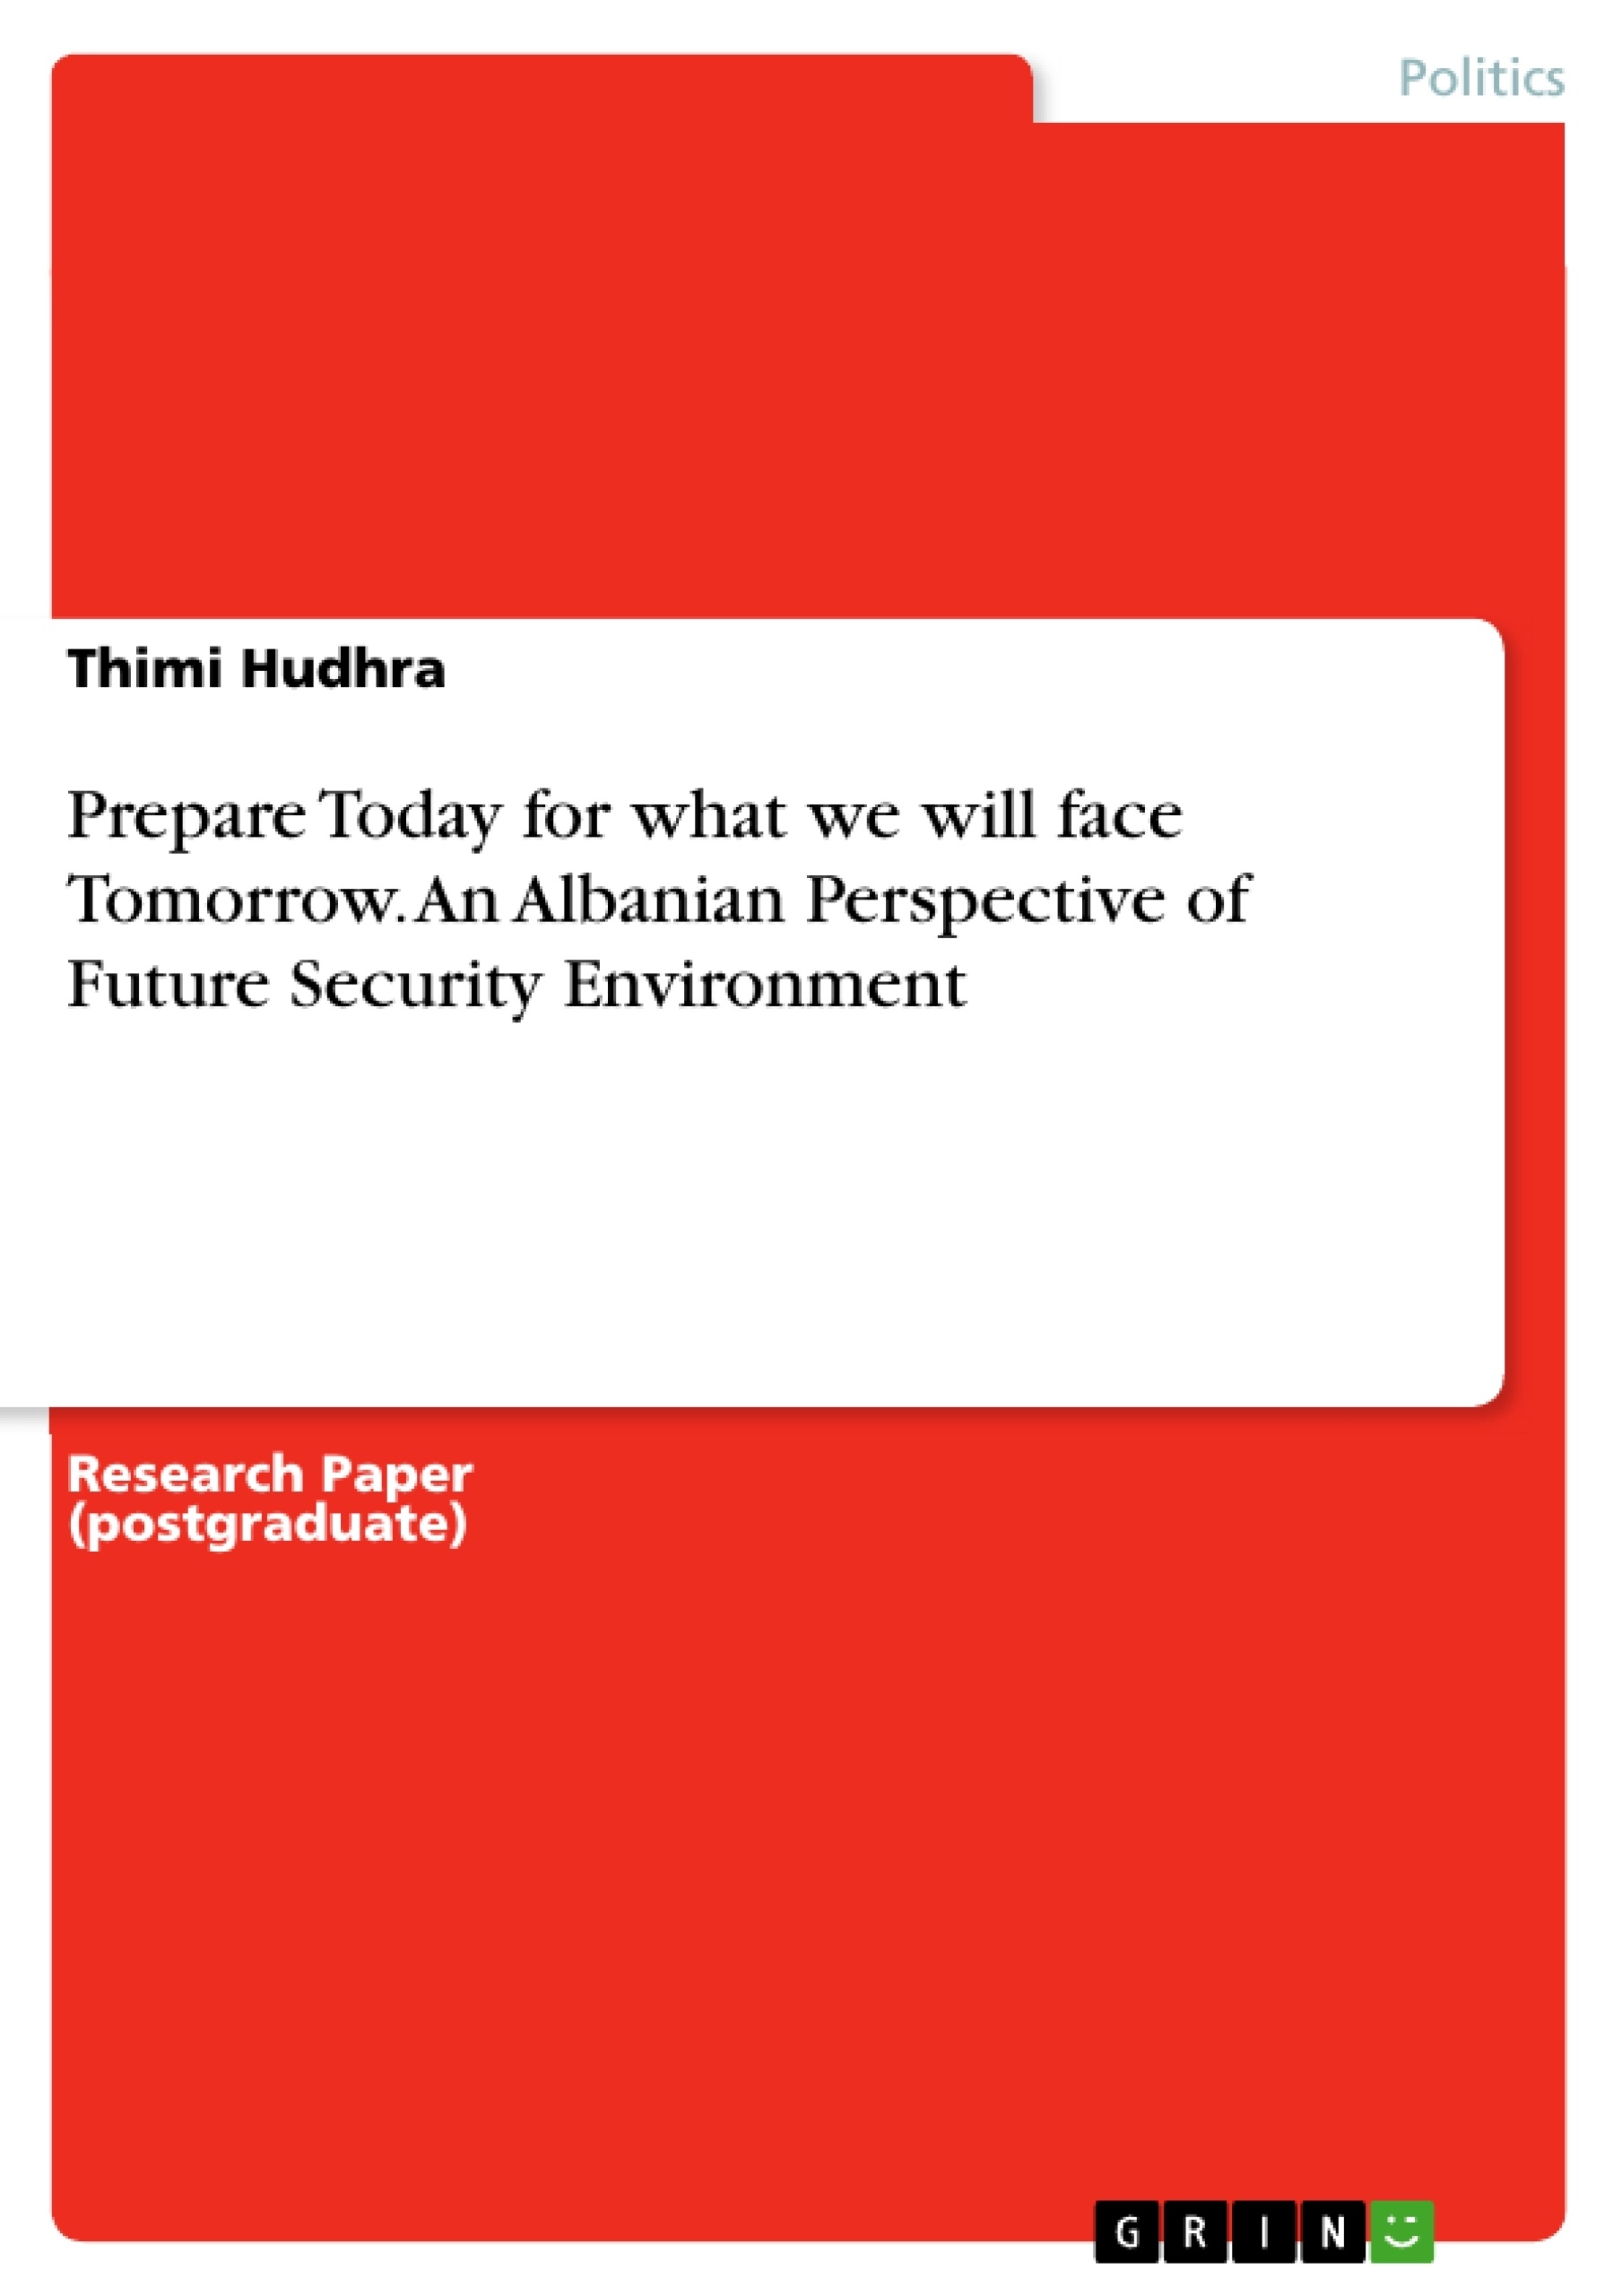 Titel: Prepare Today for what we will face Tomorrow. An Albanian Perspective of Future Security Environment